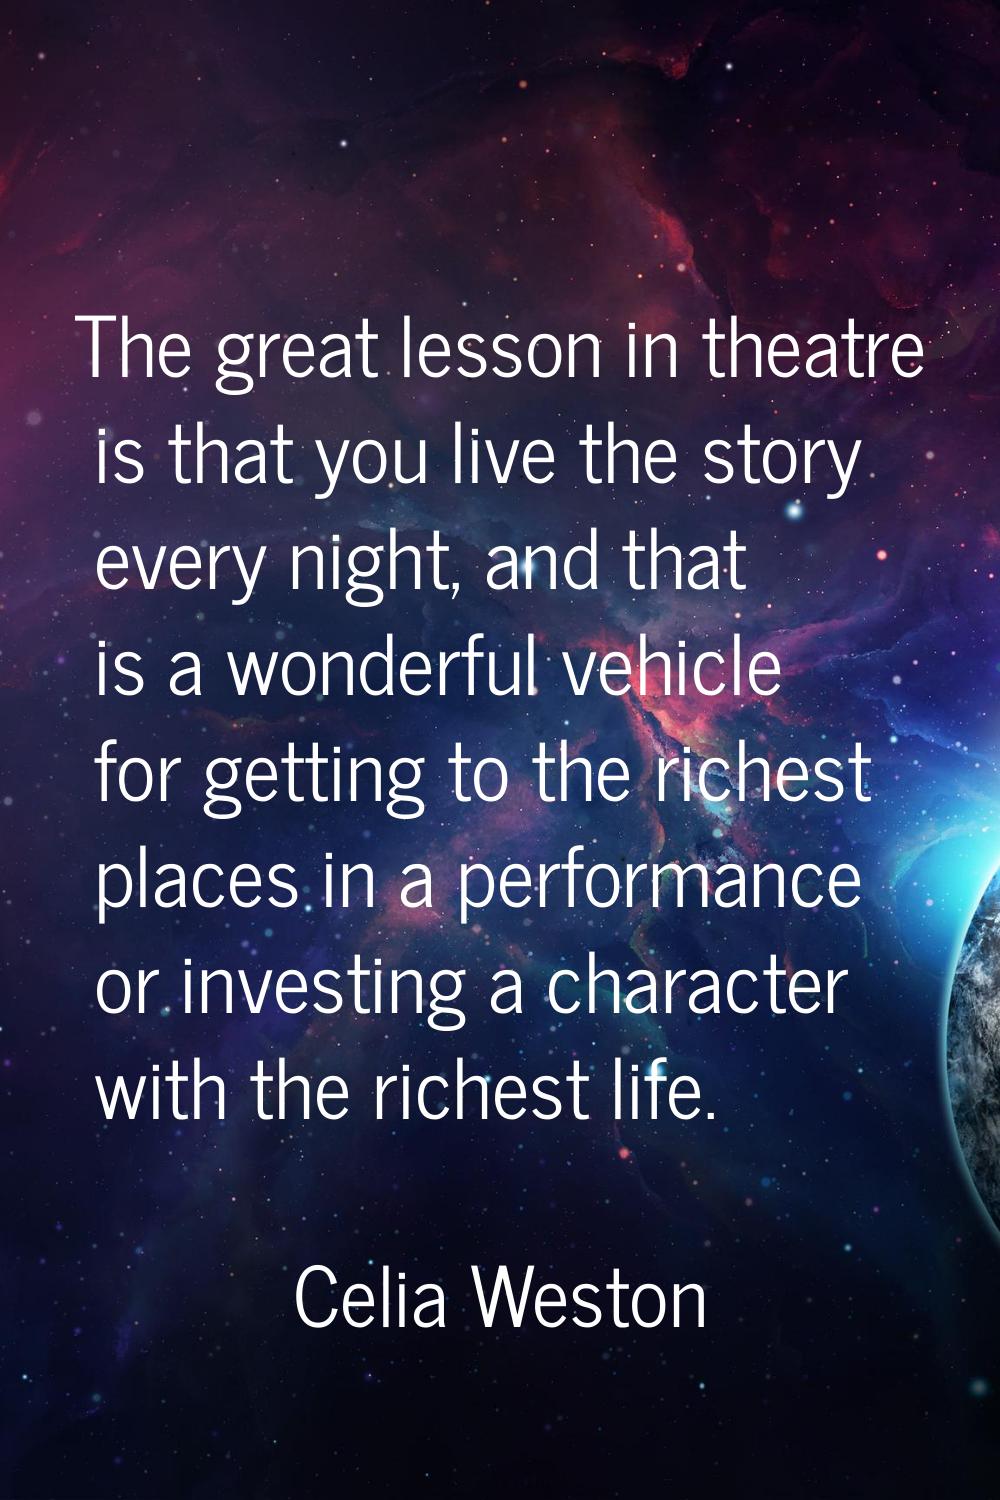 The great lesson in theatre is that you live the story every night, and that is a wonderful vehicle